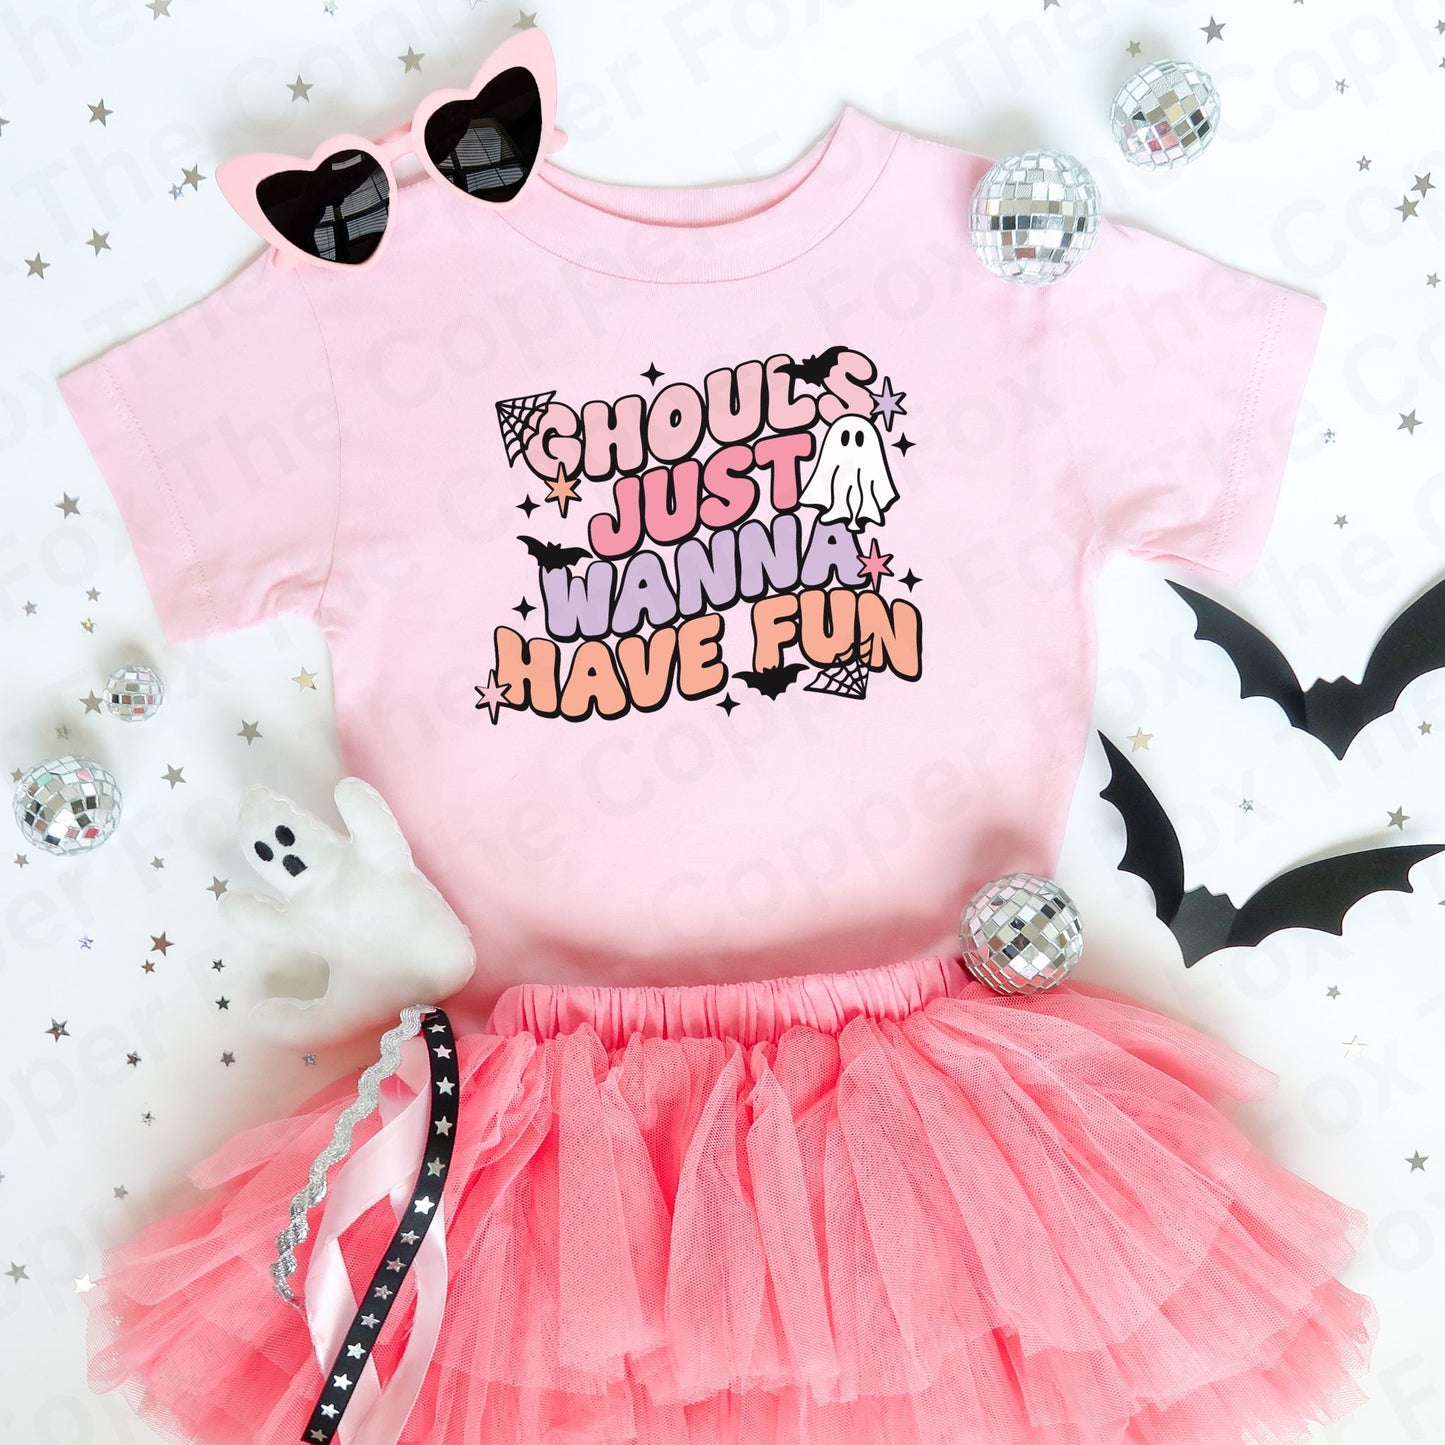 Ghouls just Wanna Have Fun Halloween Toddler Tee